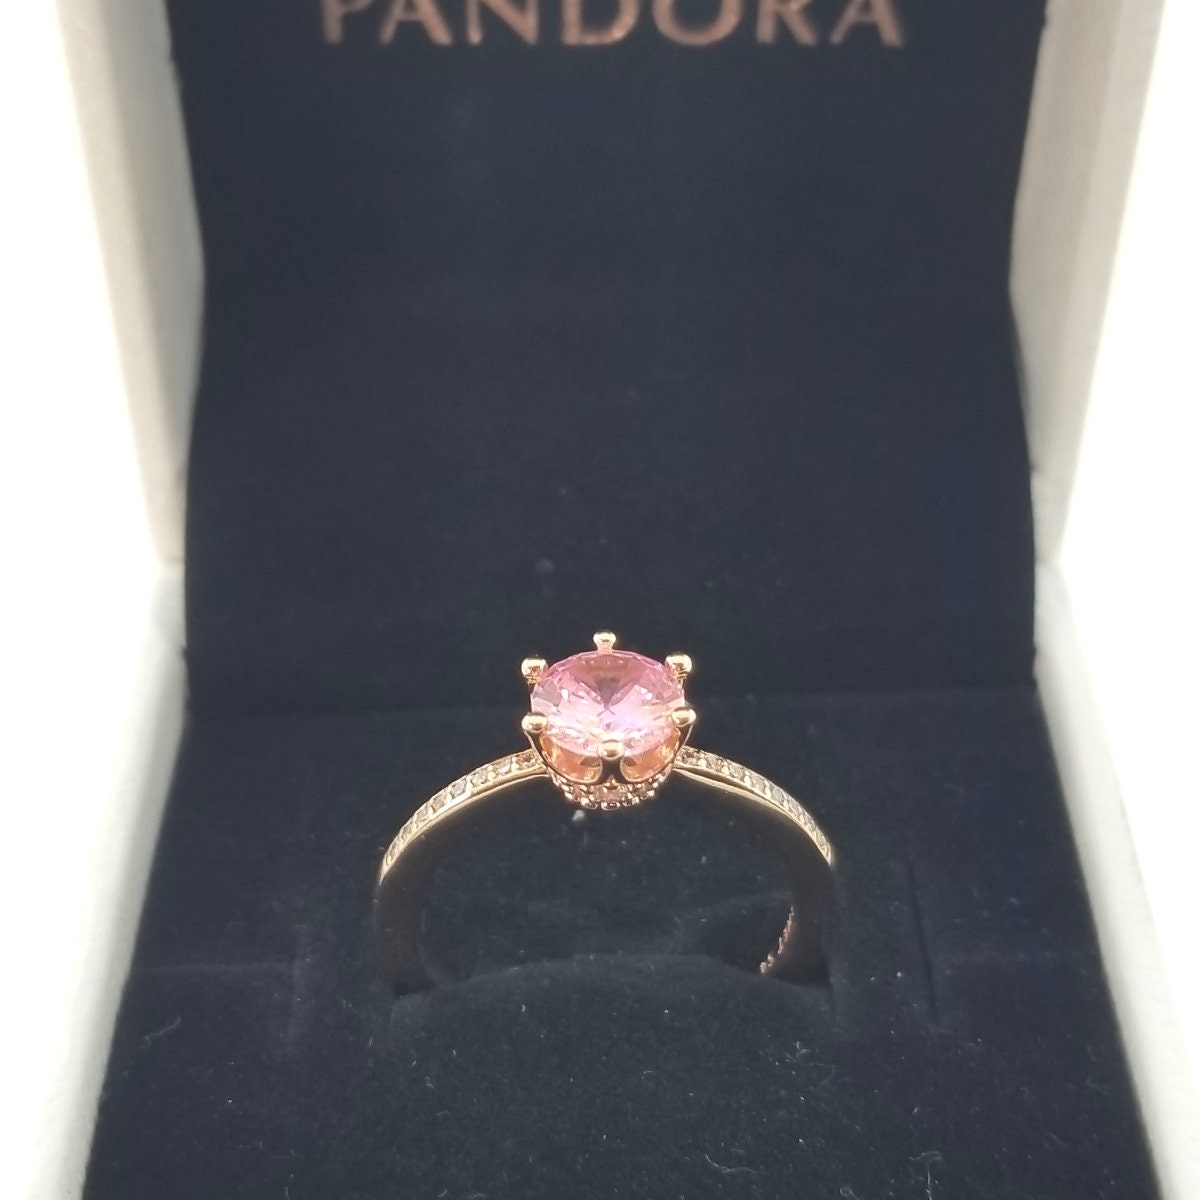 New Pandora Rose Pink Sparkling Crown Solitaire Ring - Etsy